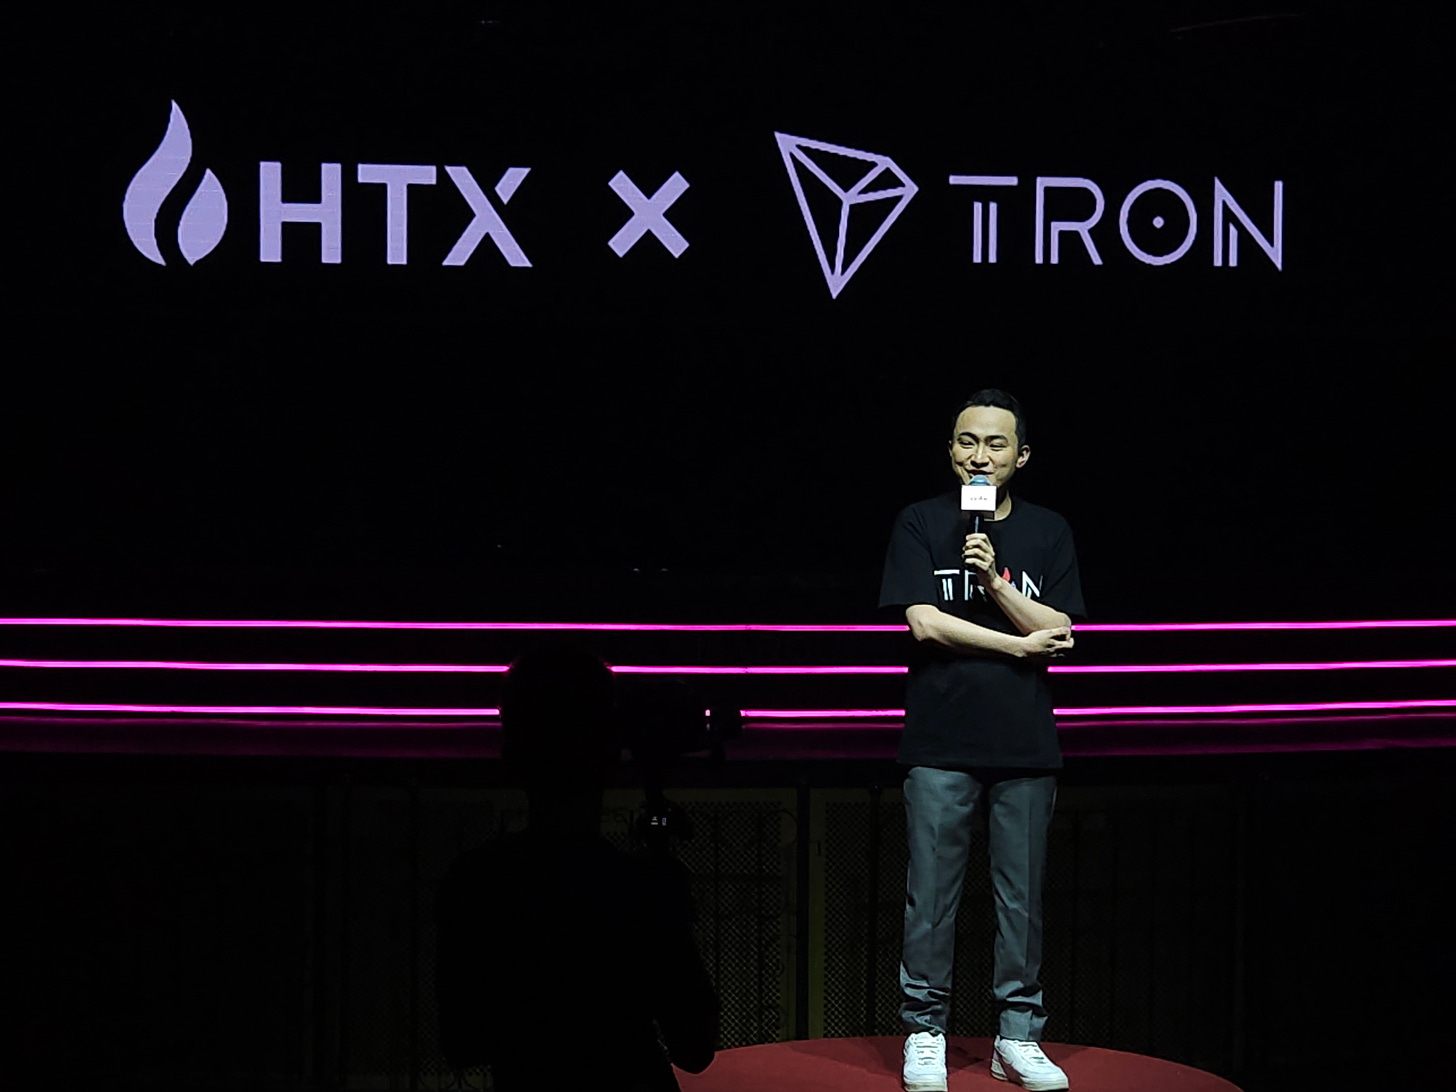 Justin Sun unveils the Huobi exchange’s rebranding to HTX in Singapore on Sept. 13